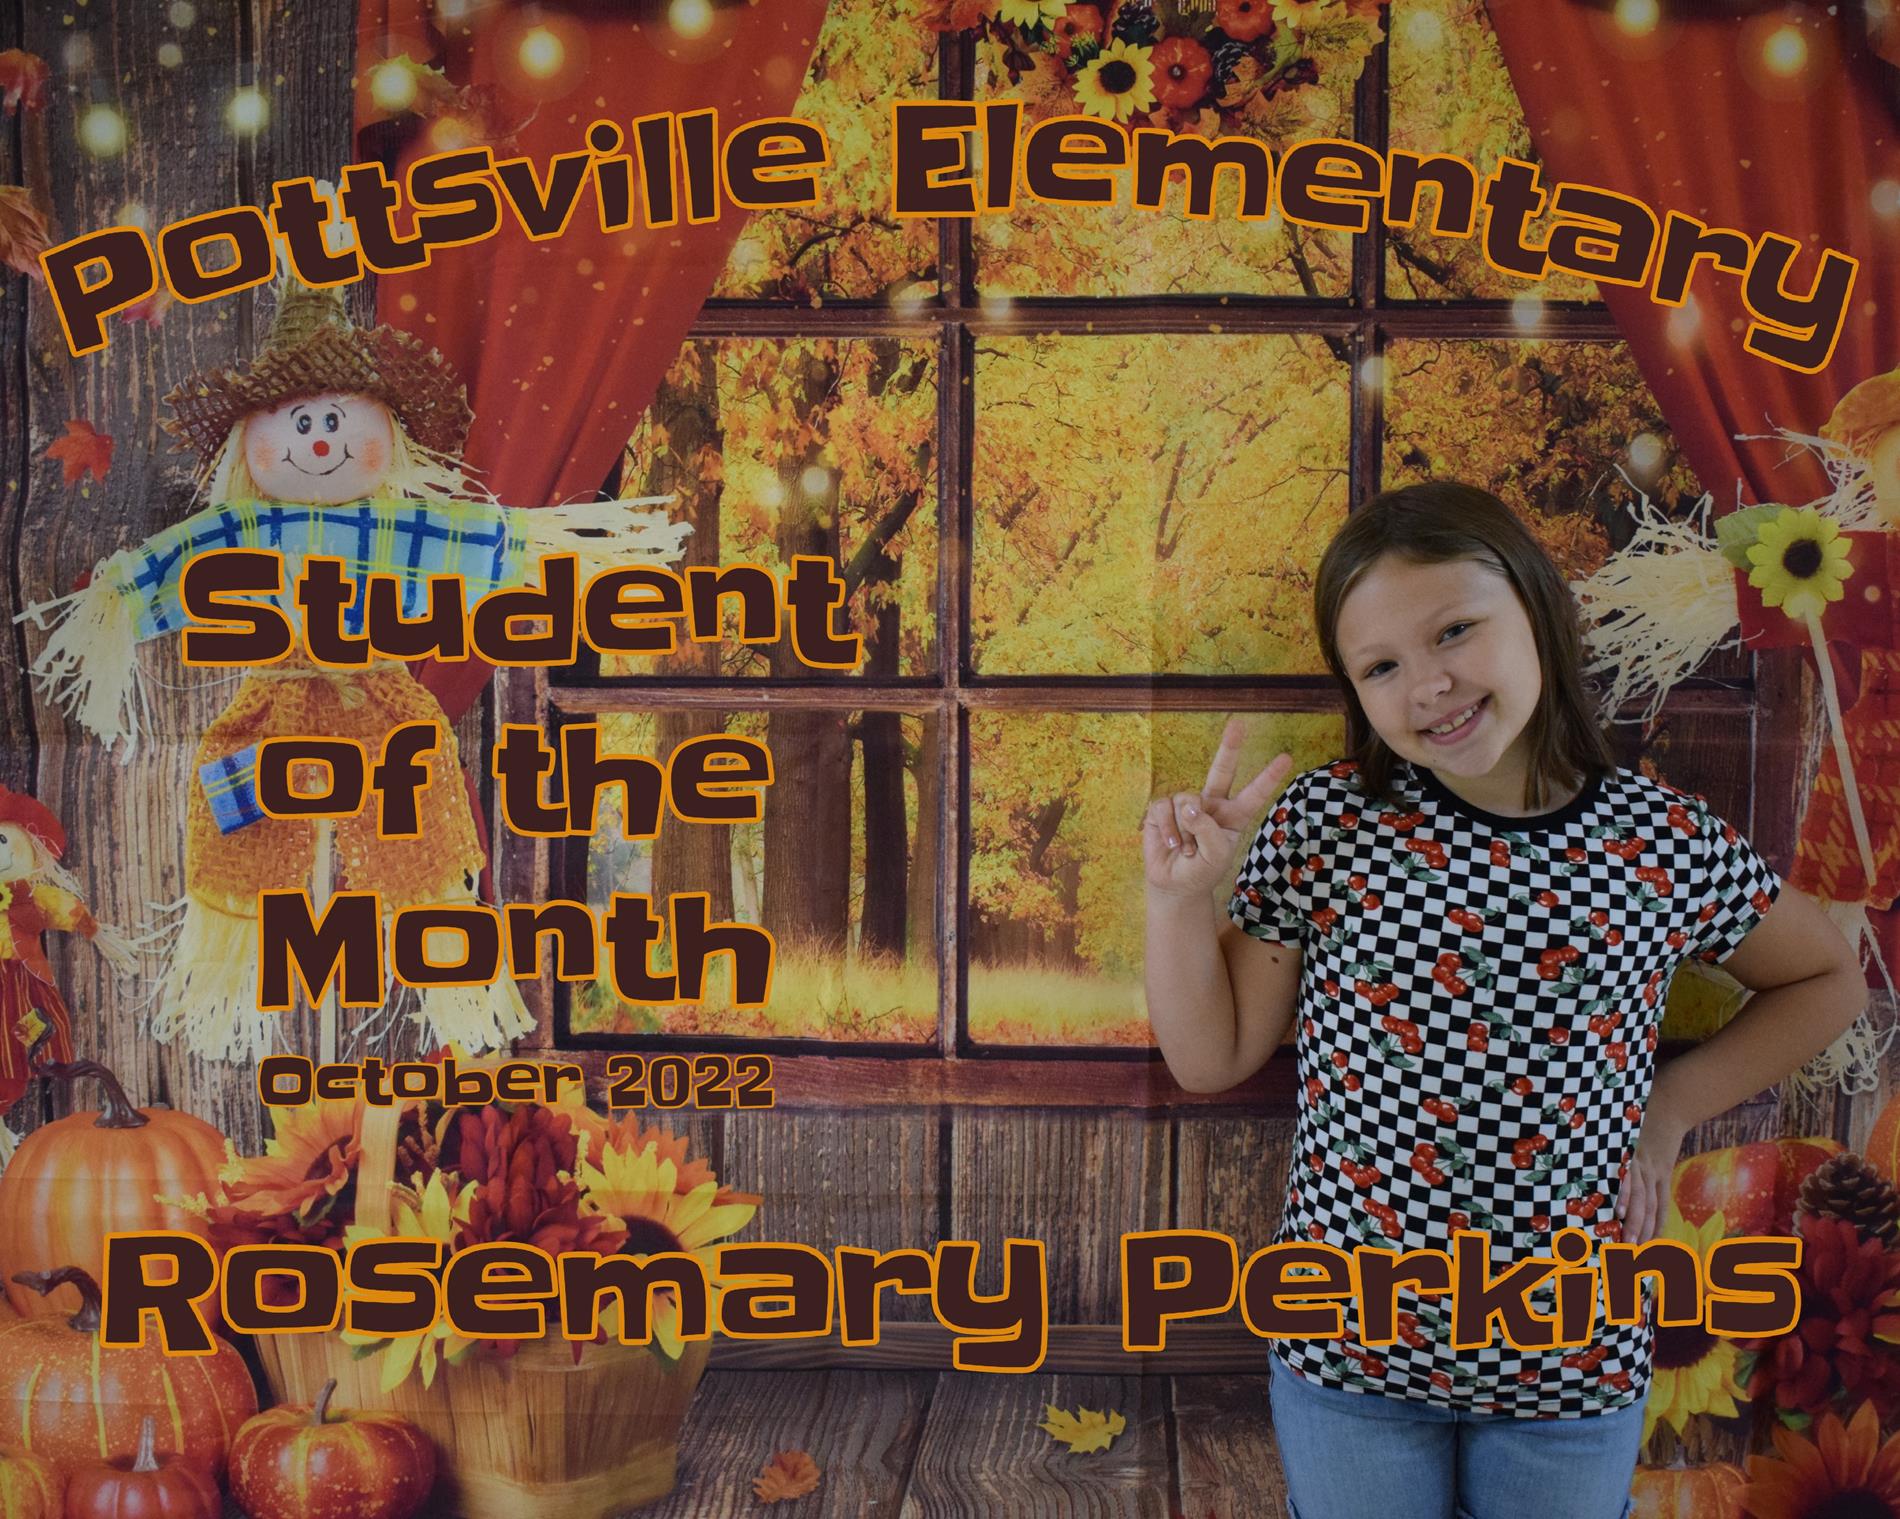 Rosemary Perkins, a second grader, has been named Student of the Month for October.